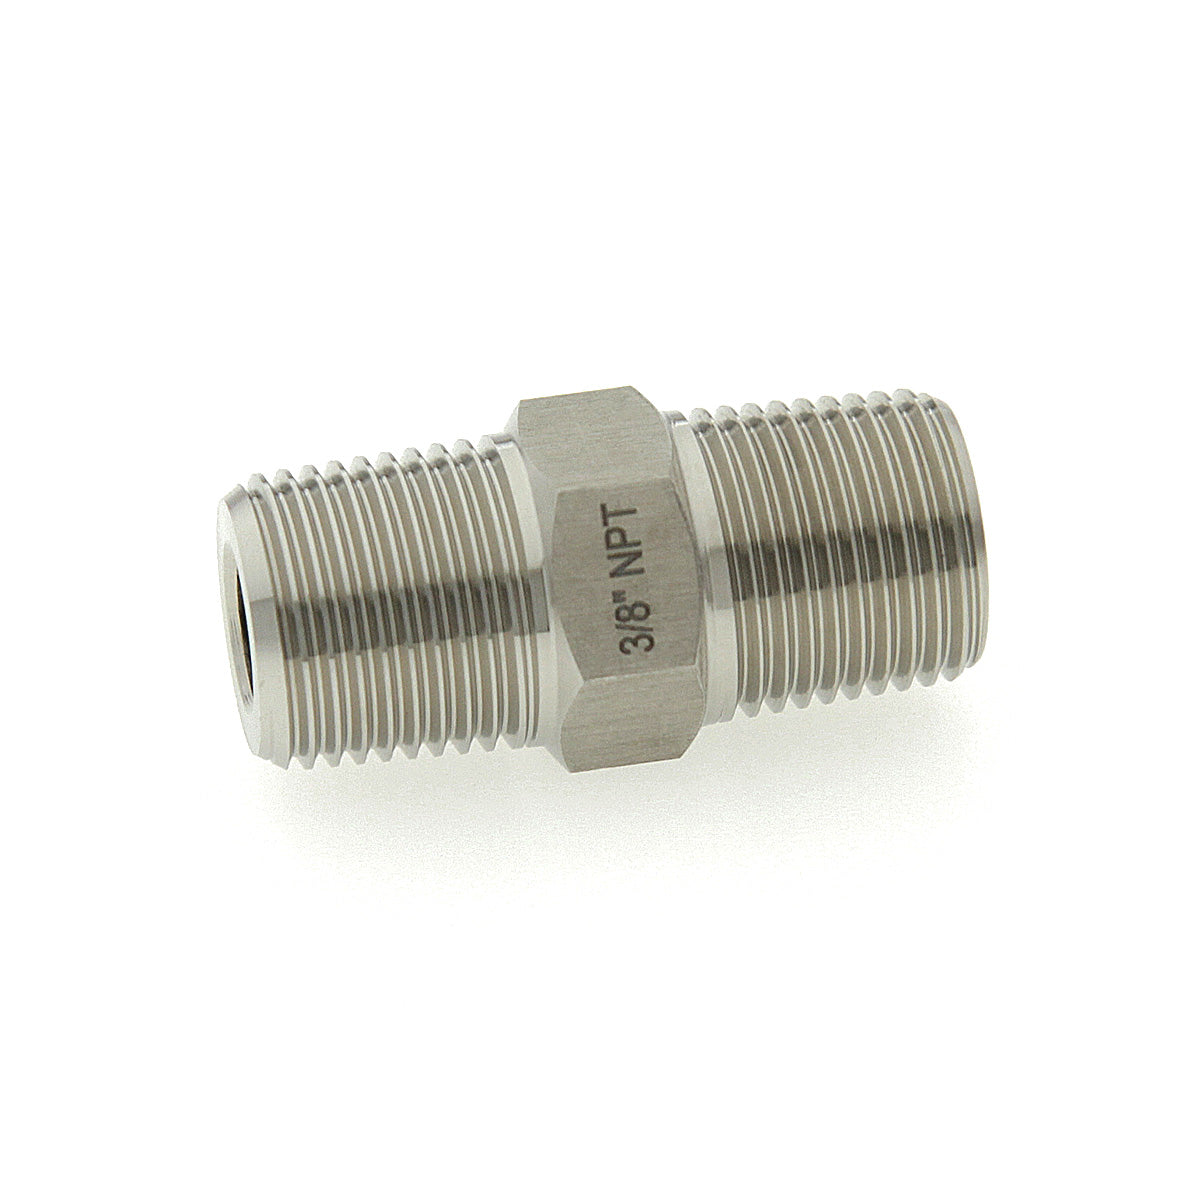 Reducers and Straight Hex Nipple Connectors